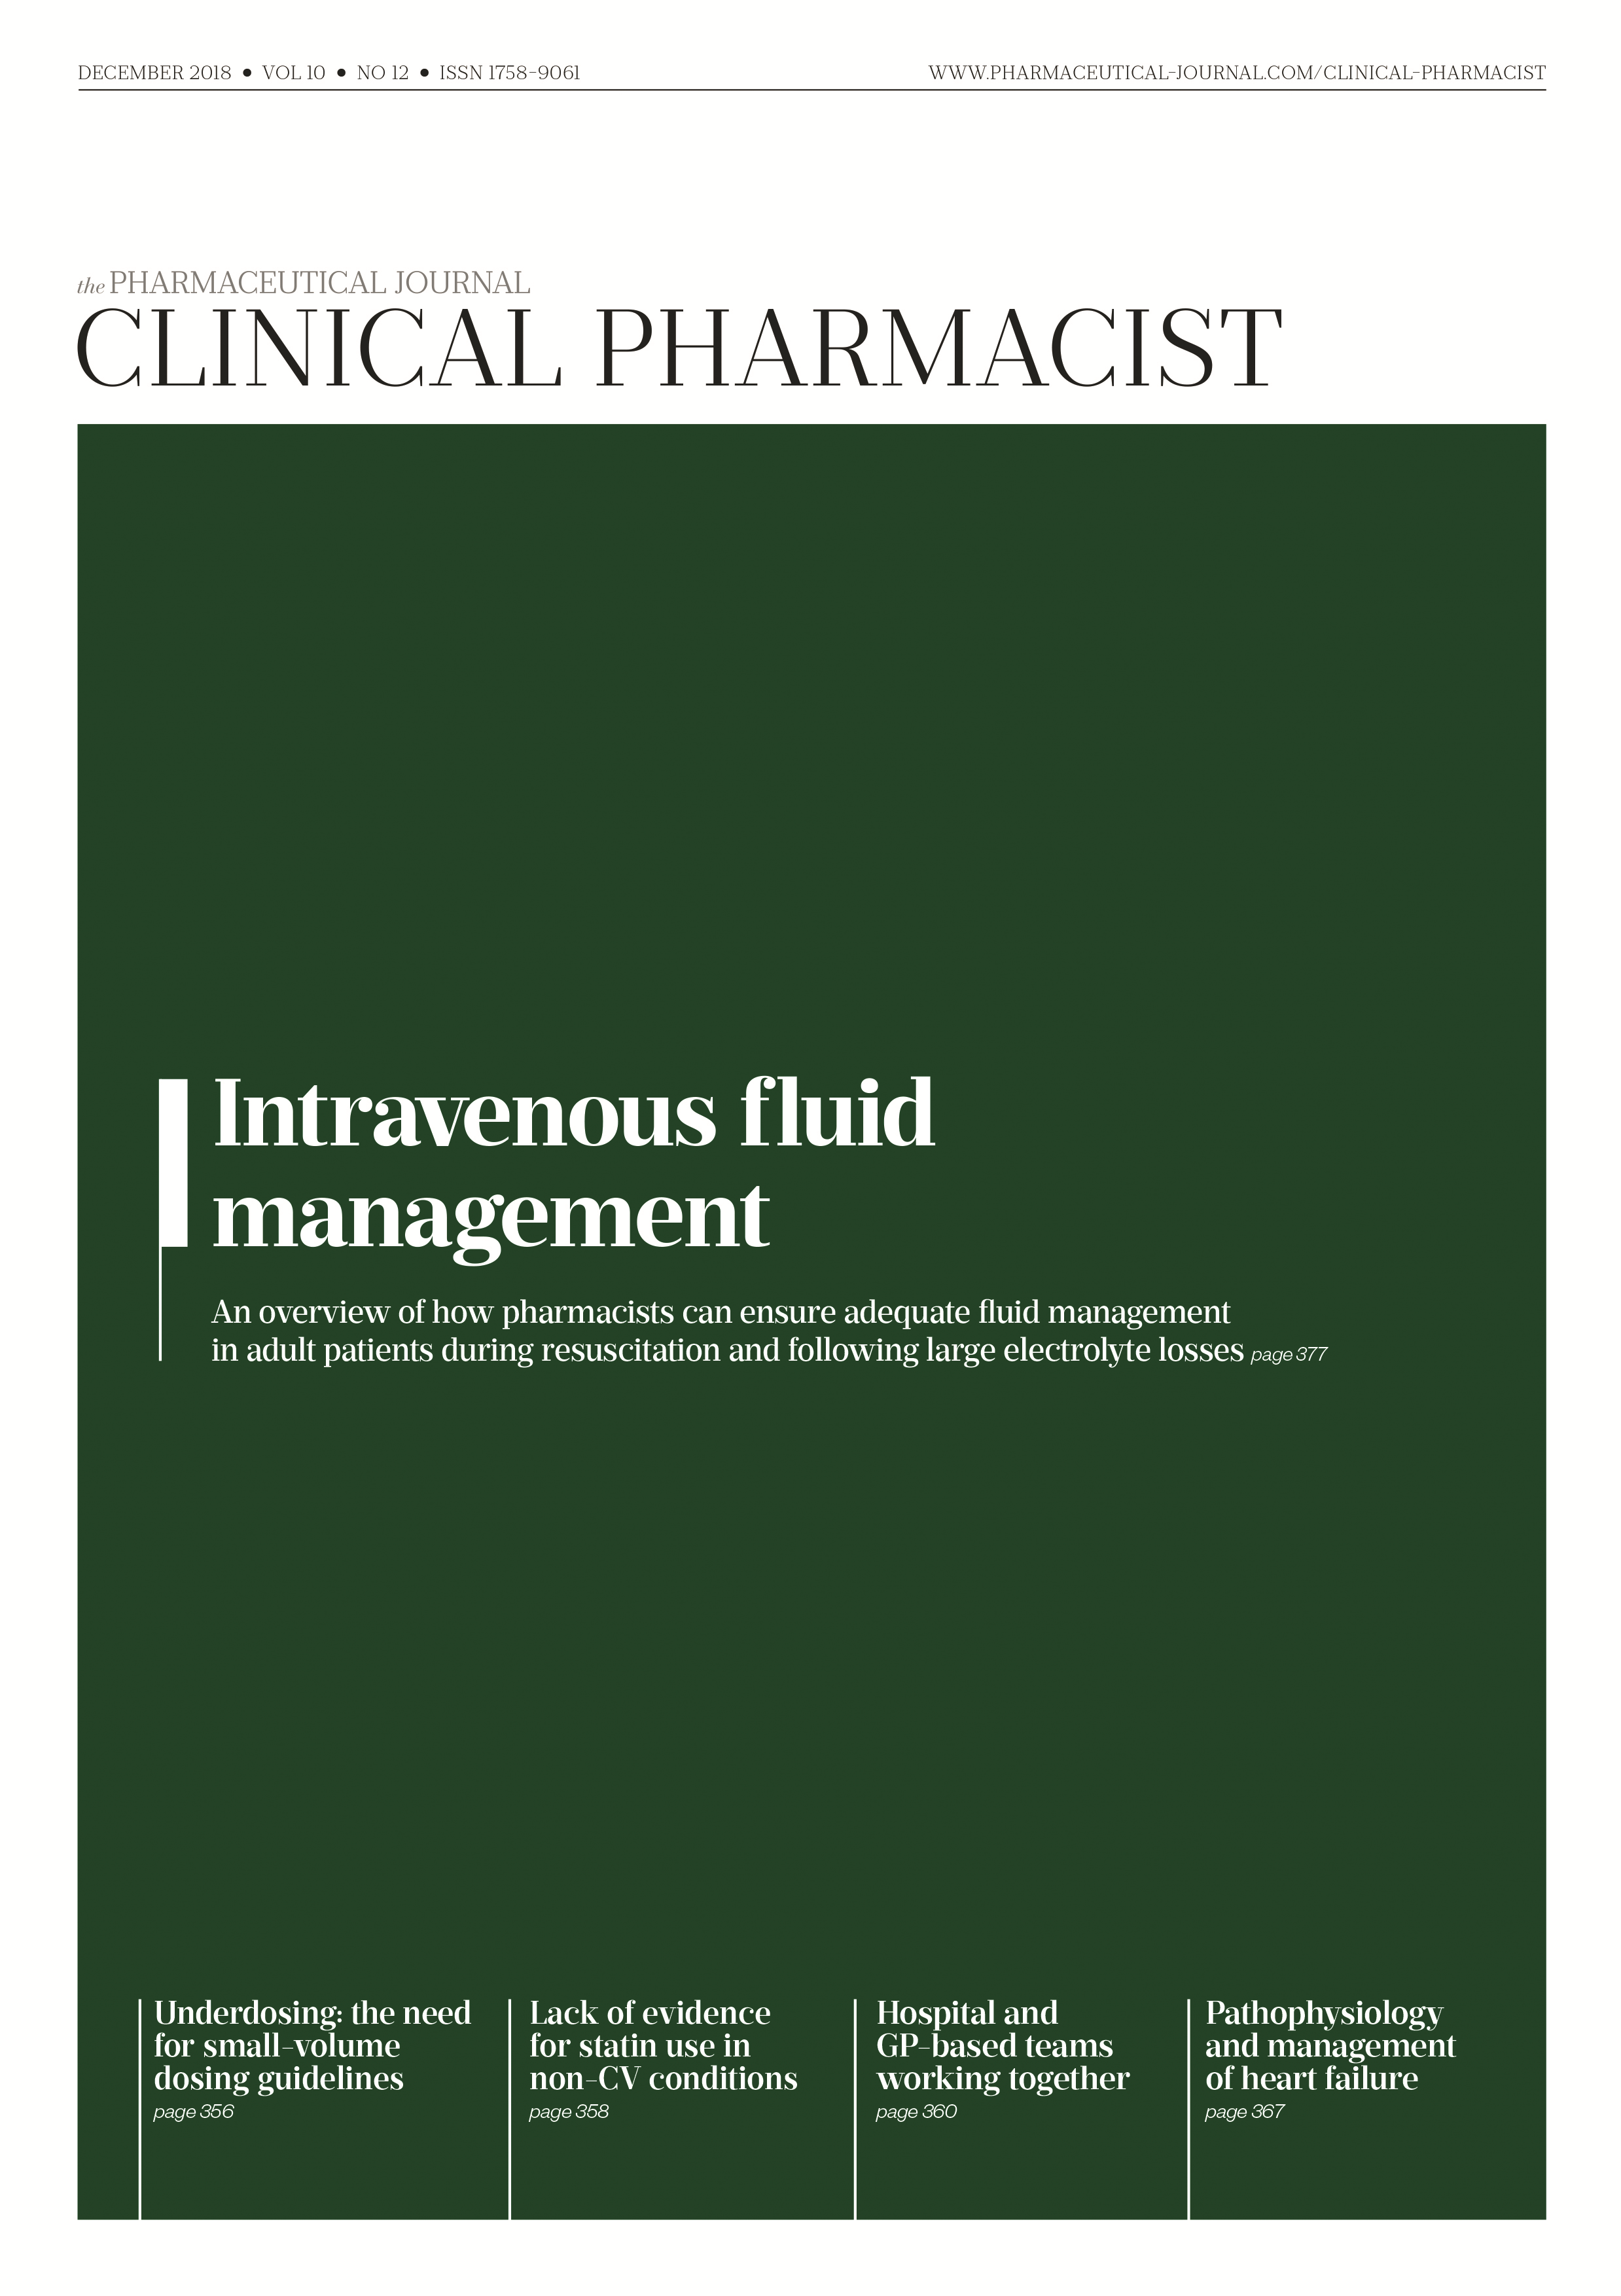 Publication issue cover for CP, December 2018, Vol 10, No 12